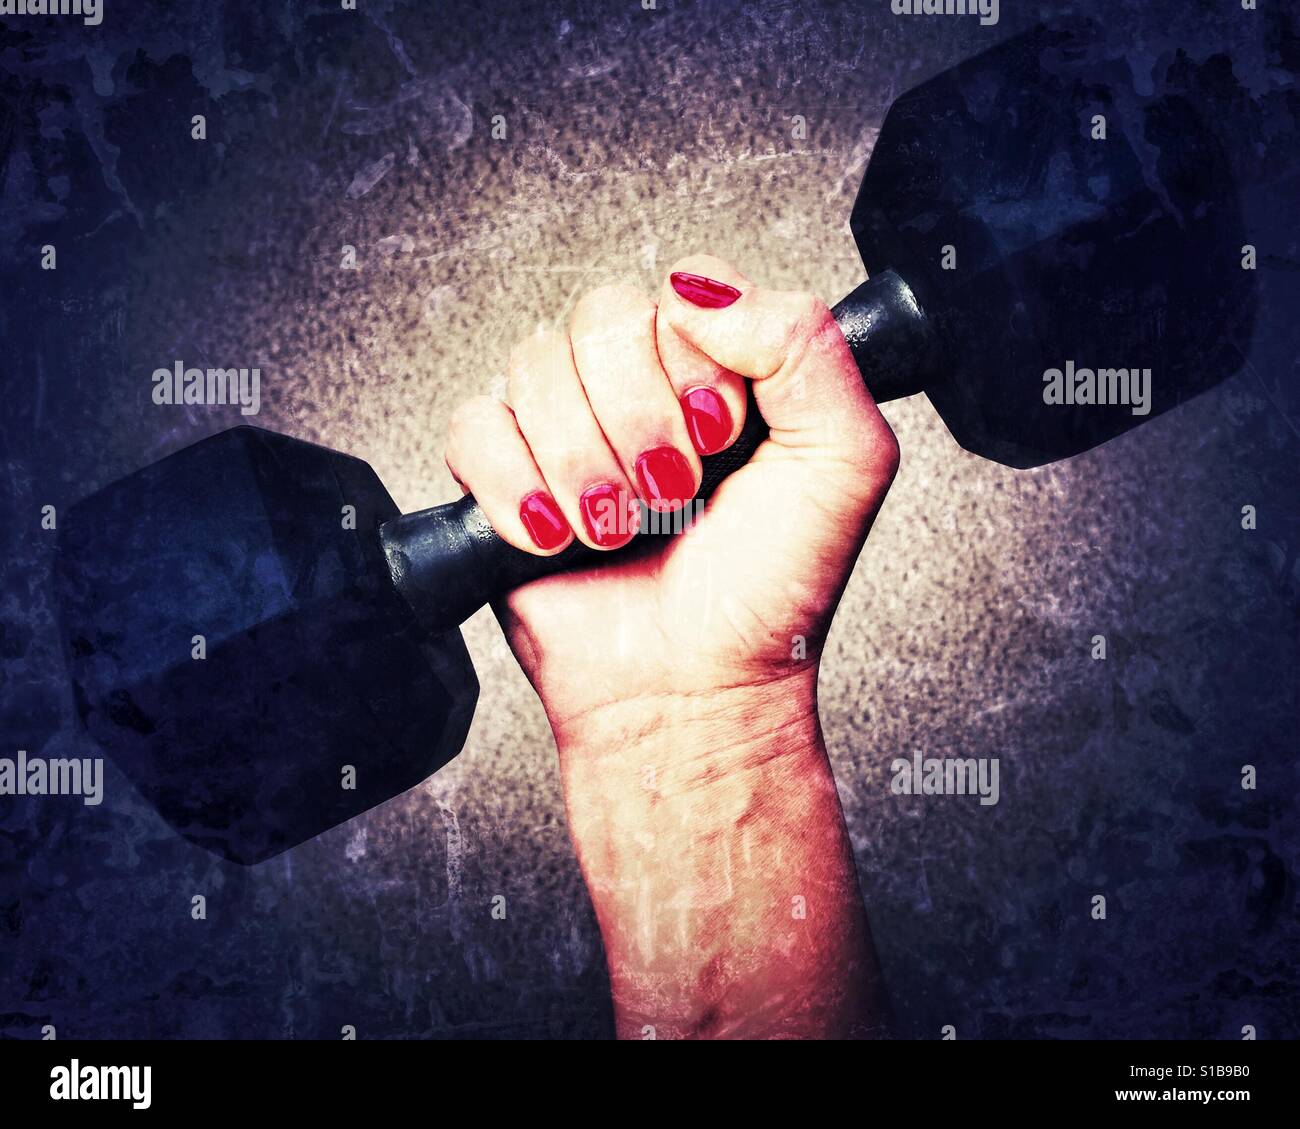 Woman's manicured hand holding a dumbbell weight. Grunge edit. Stock Photo